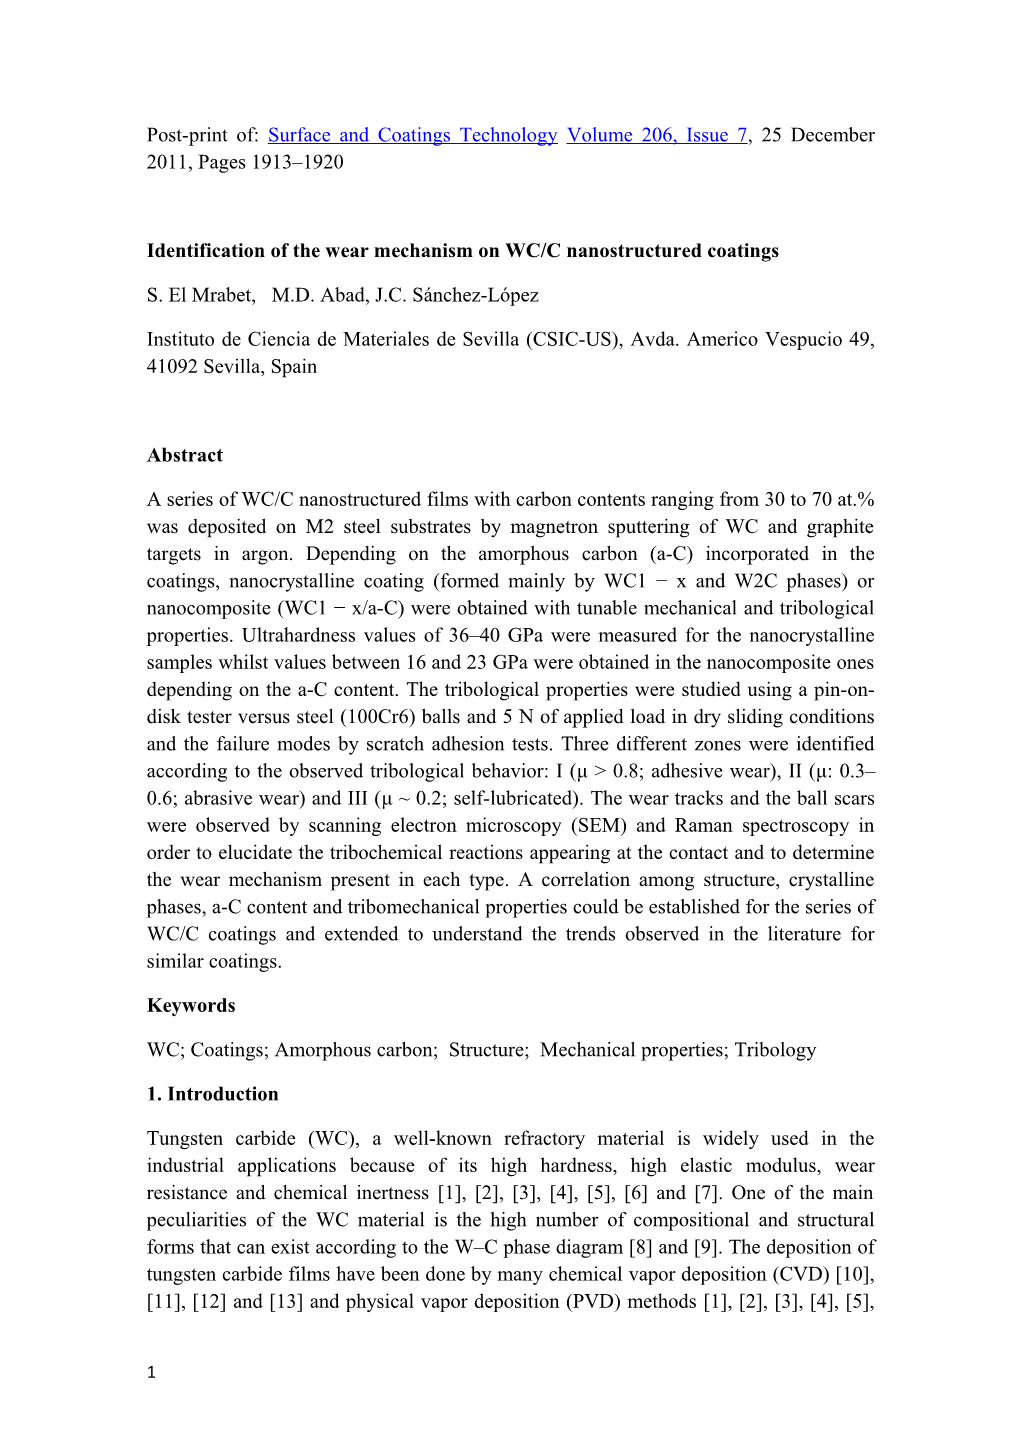 Identification of the Wear Mechanism on WC/C Nanostructured Coatings